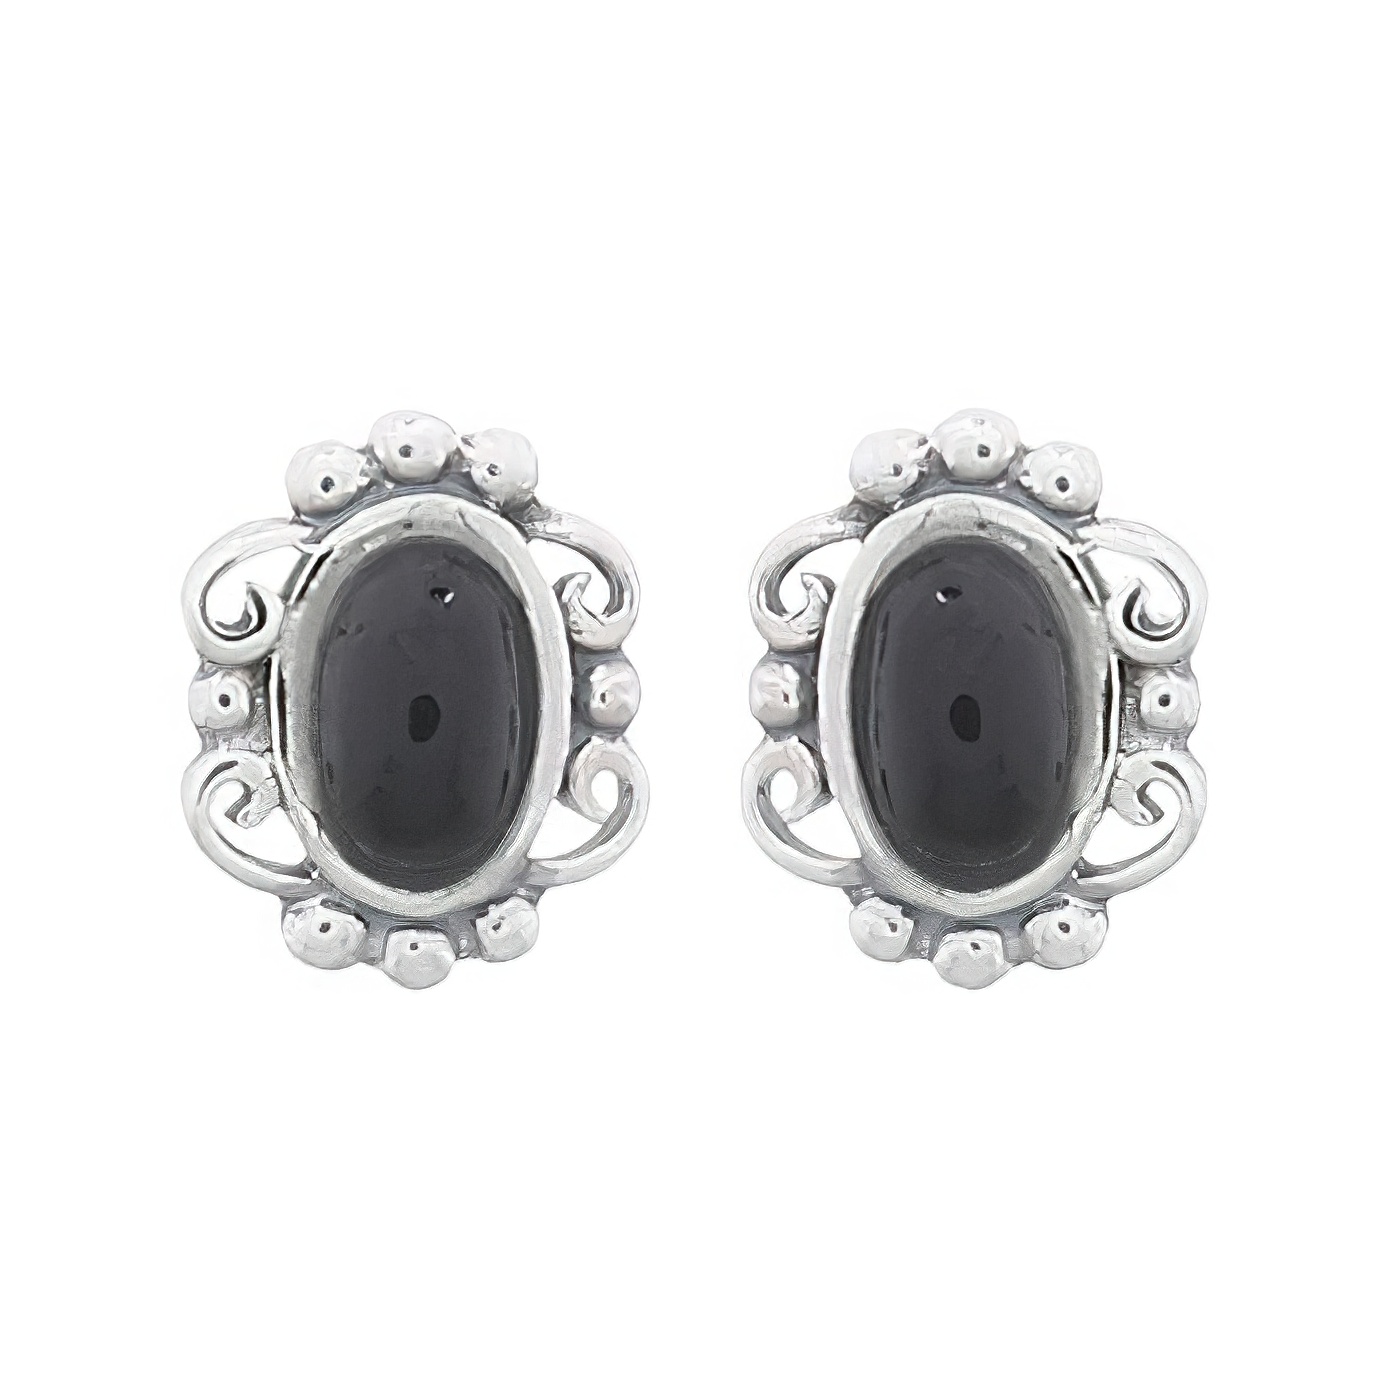 Reconstituted Stone Black Oval Filigree Silver Stud Earrings by BeYindi 